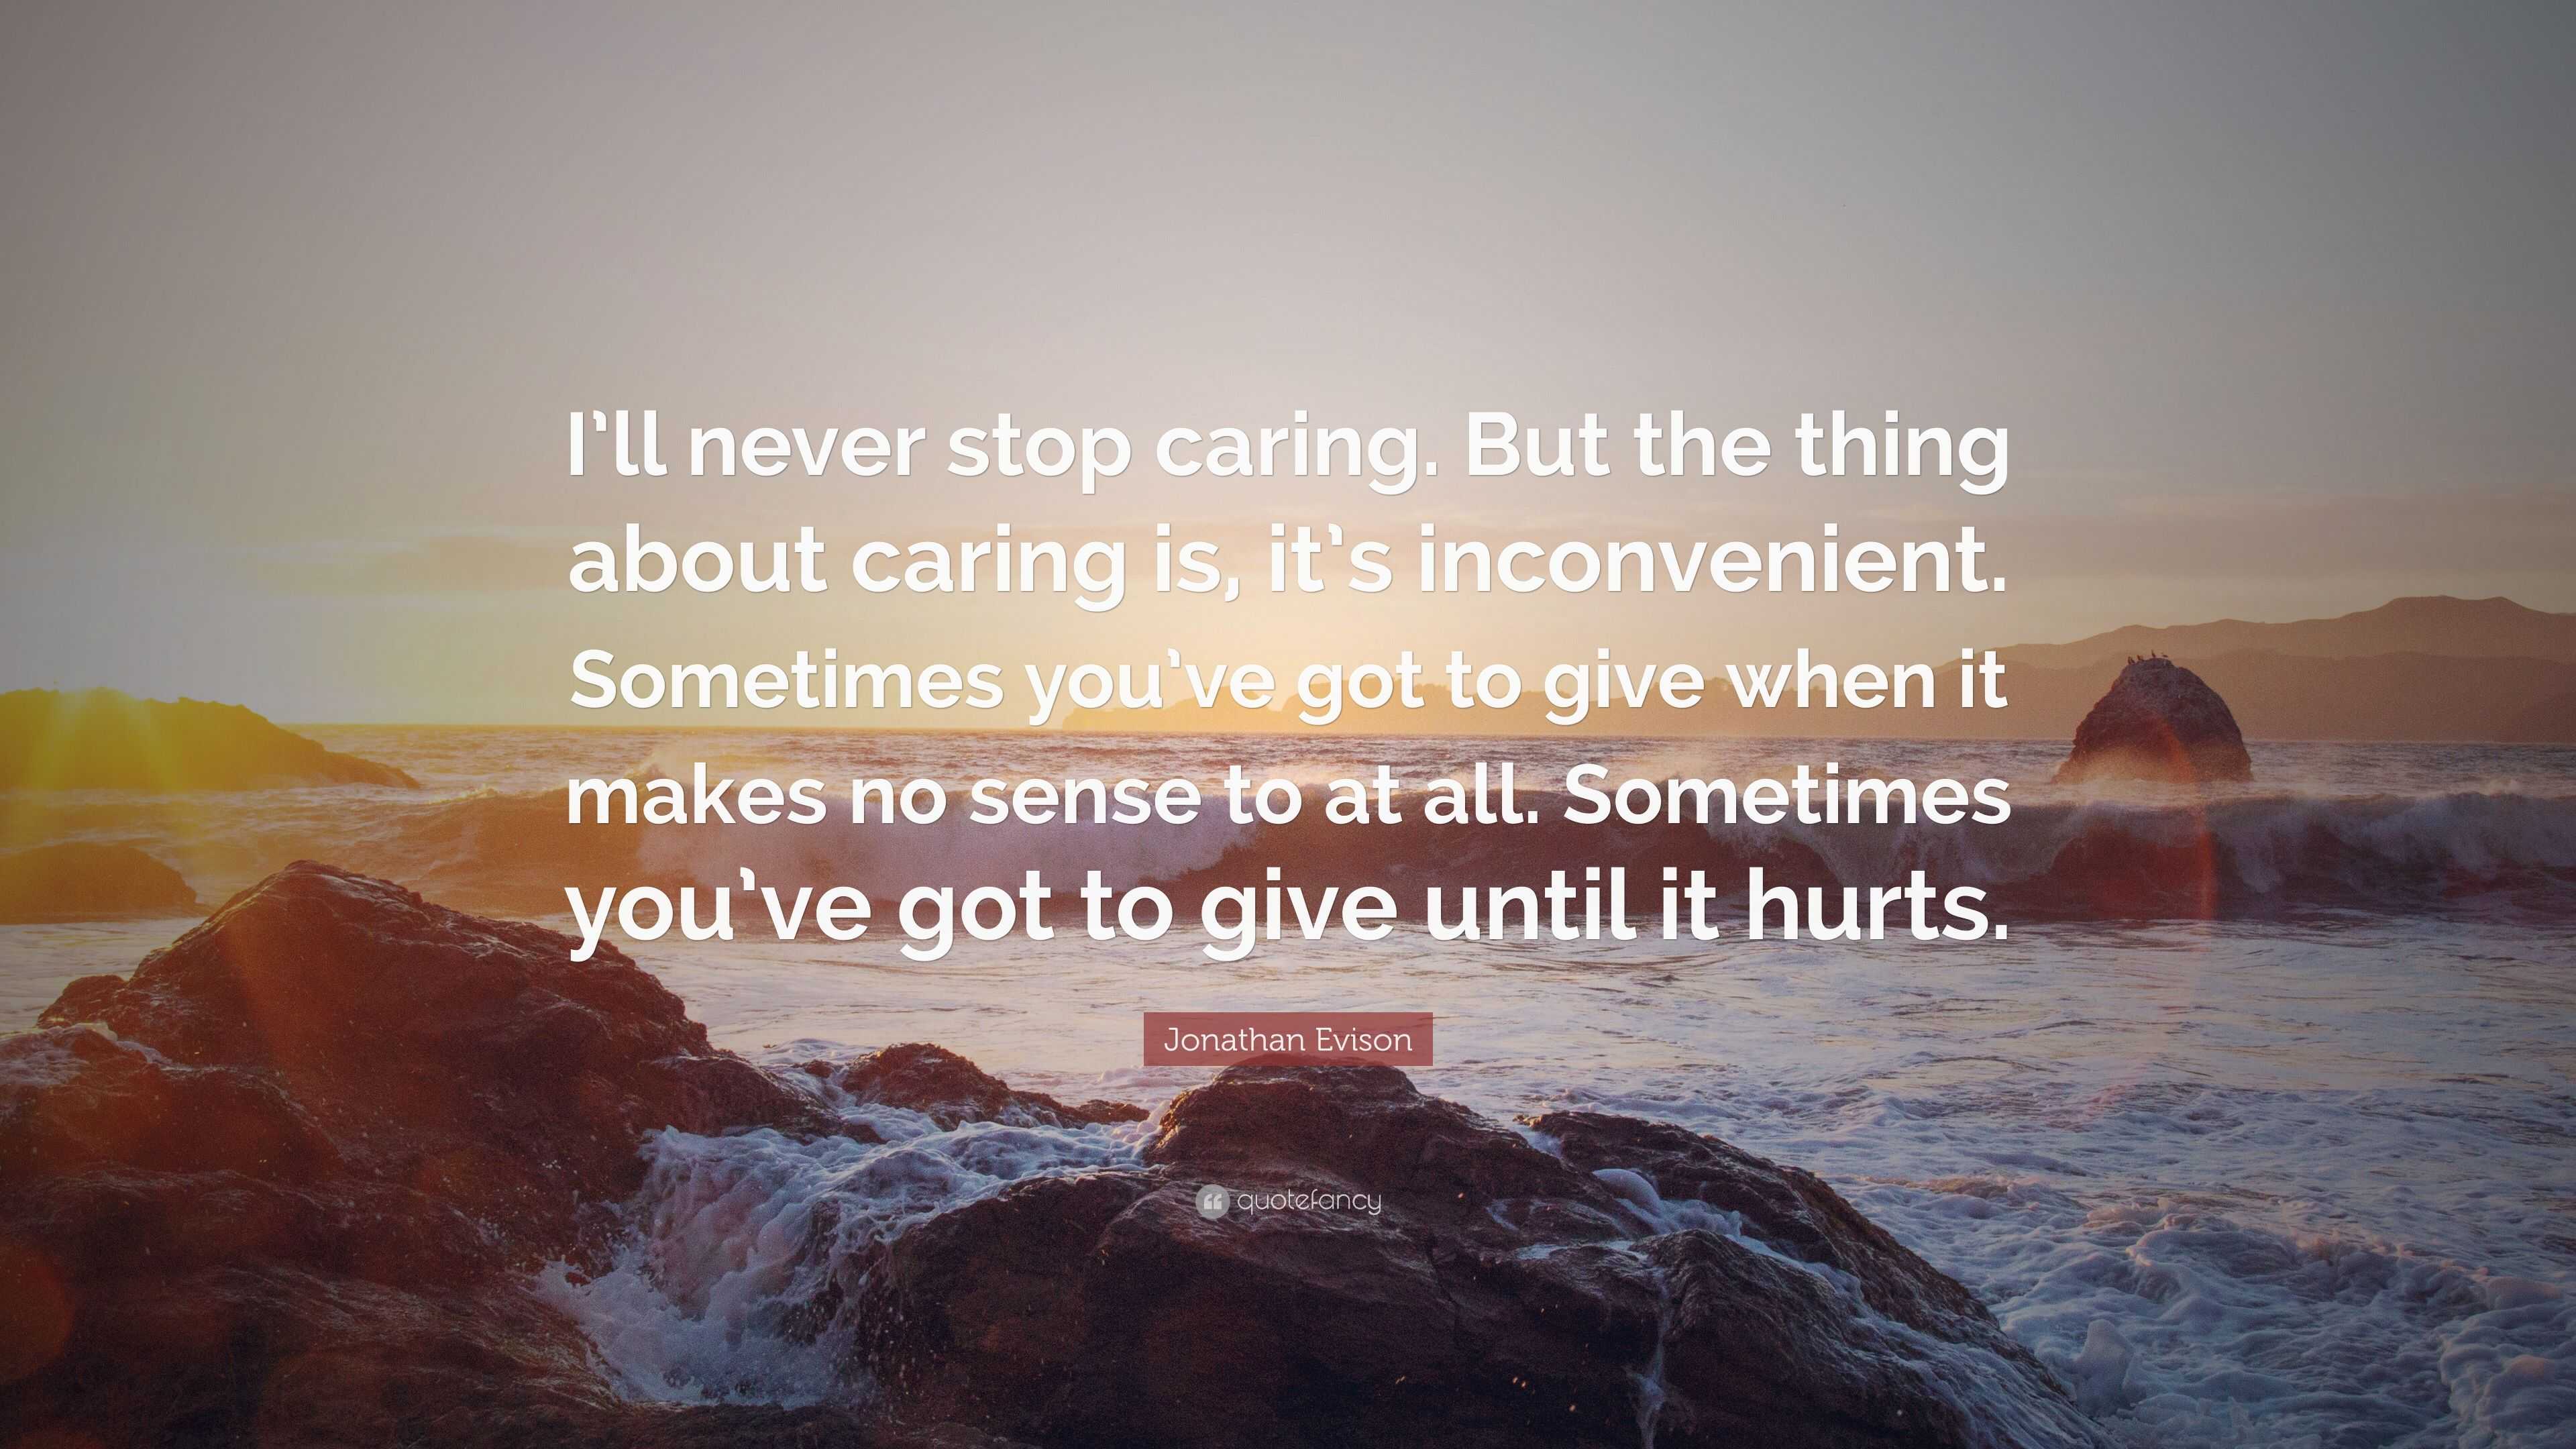 Jonathan Evison Quote: “I’ll never stop caring. But the thing about ...